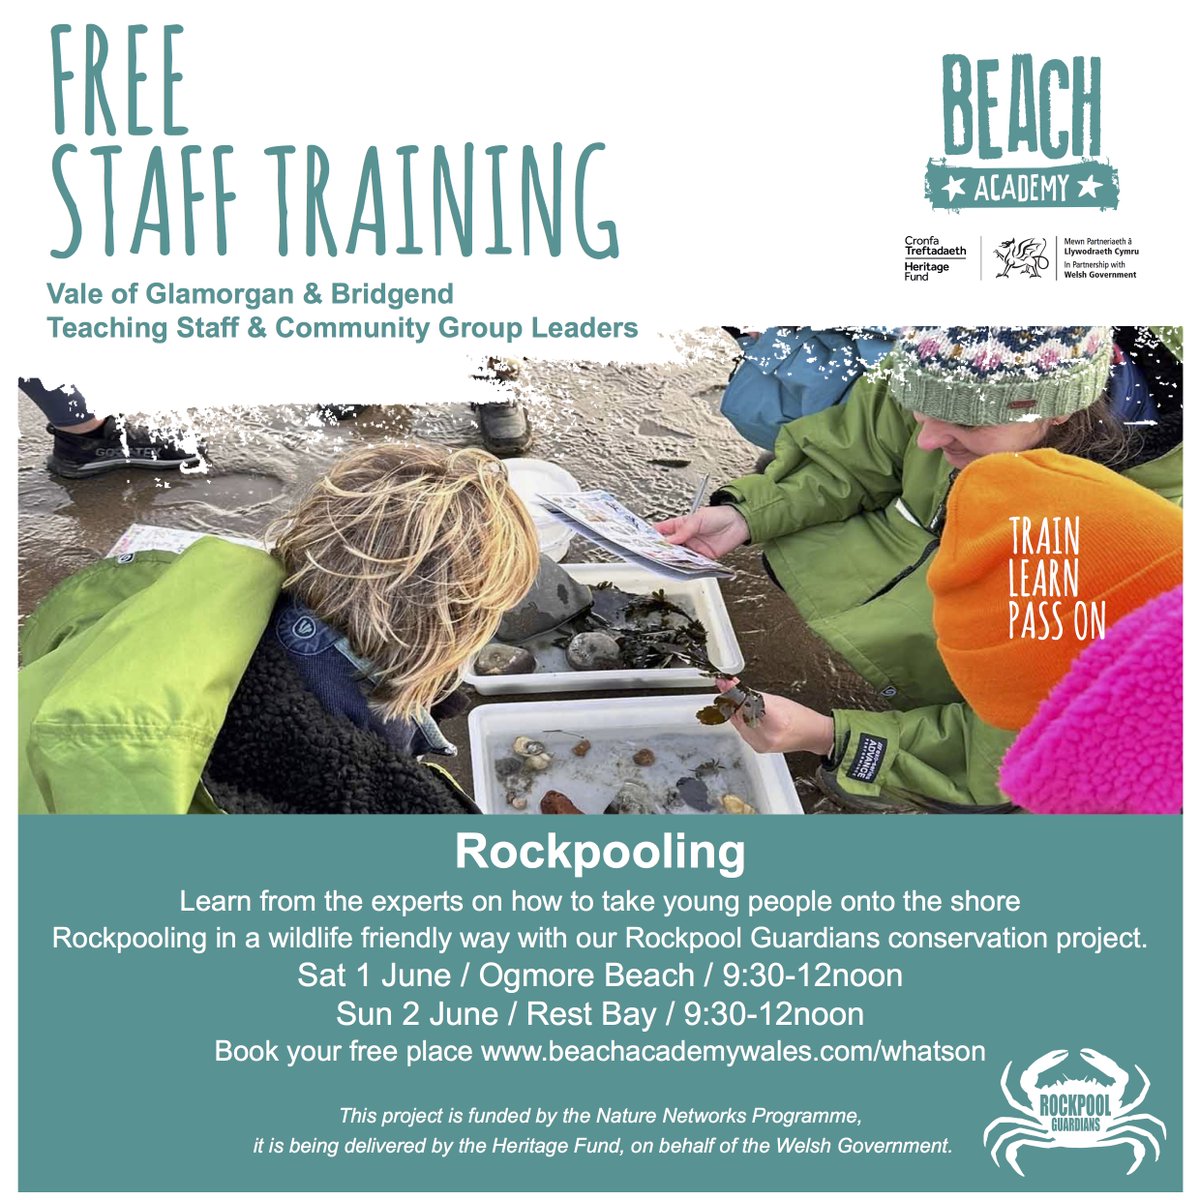 Free ‘rockpooling’ training opportunity*** for teaching staff and community group leaders based in Bridgend or Vale see attached for details. Part of the Rockpool Guardians project. 
#NatureNetworks #HeritageFund #NatureNetworksFund @WelshGovernment @HeritageFundCym